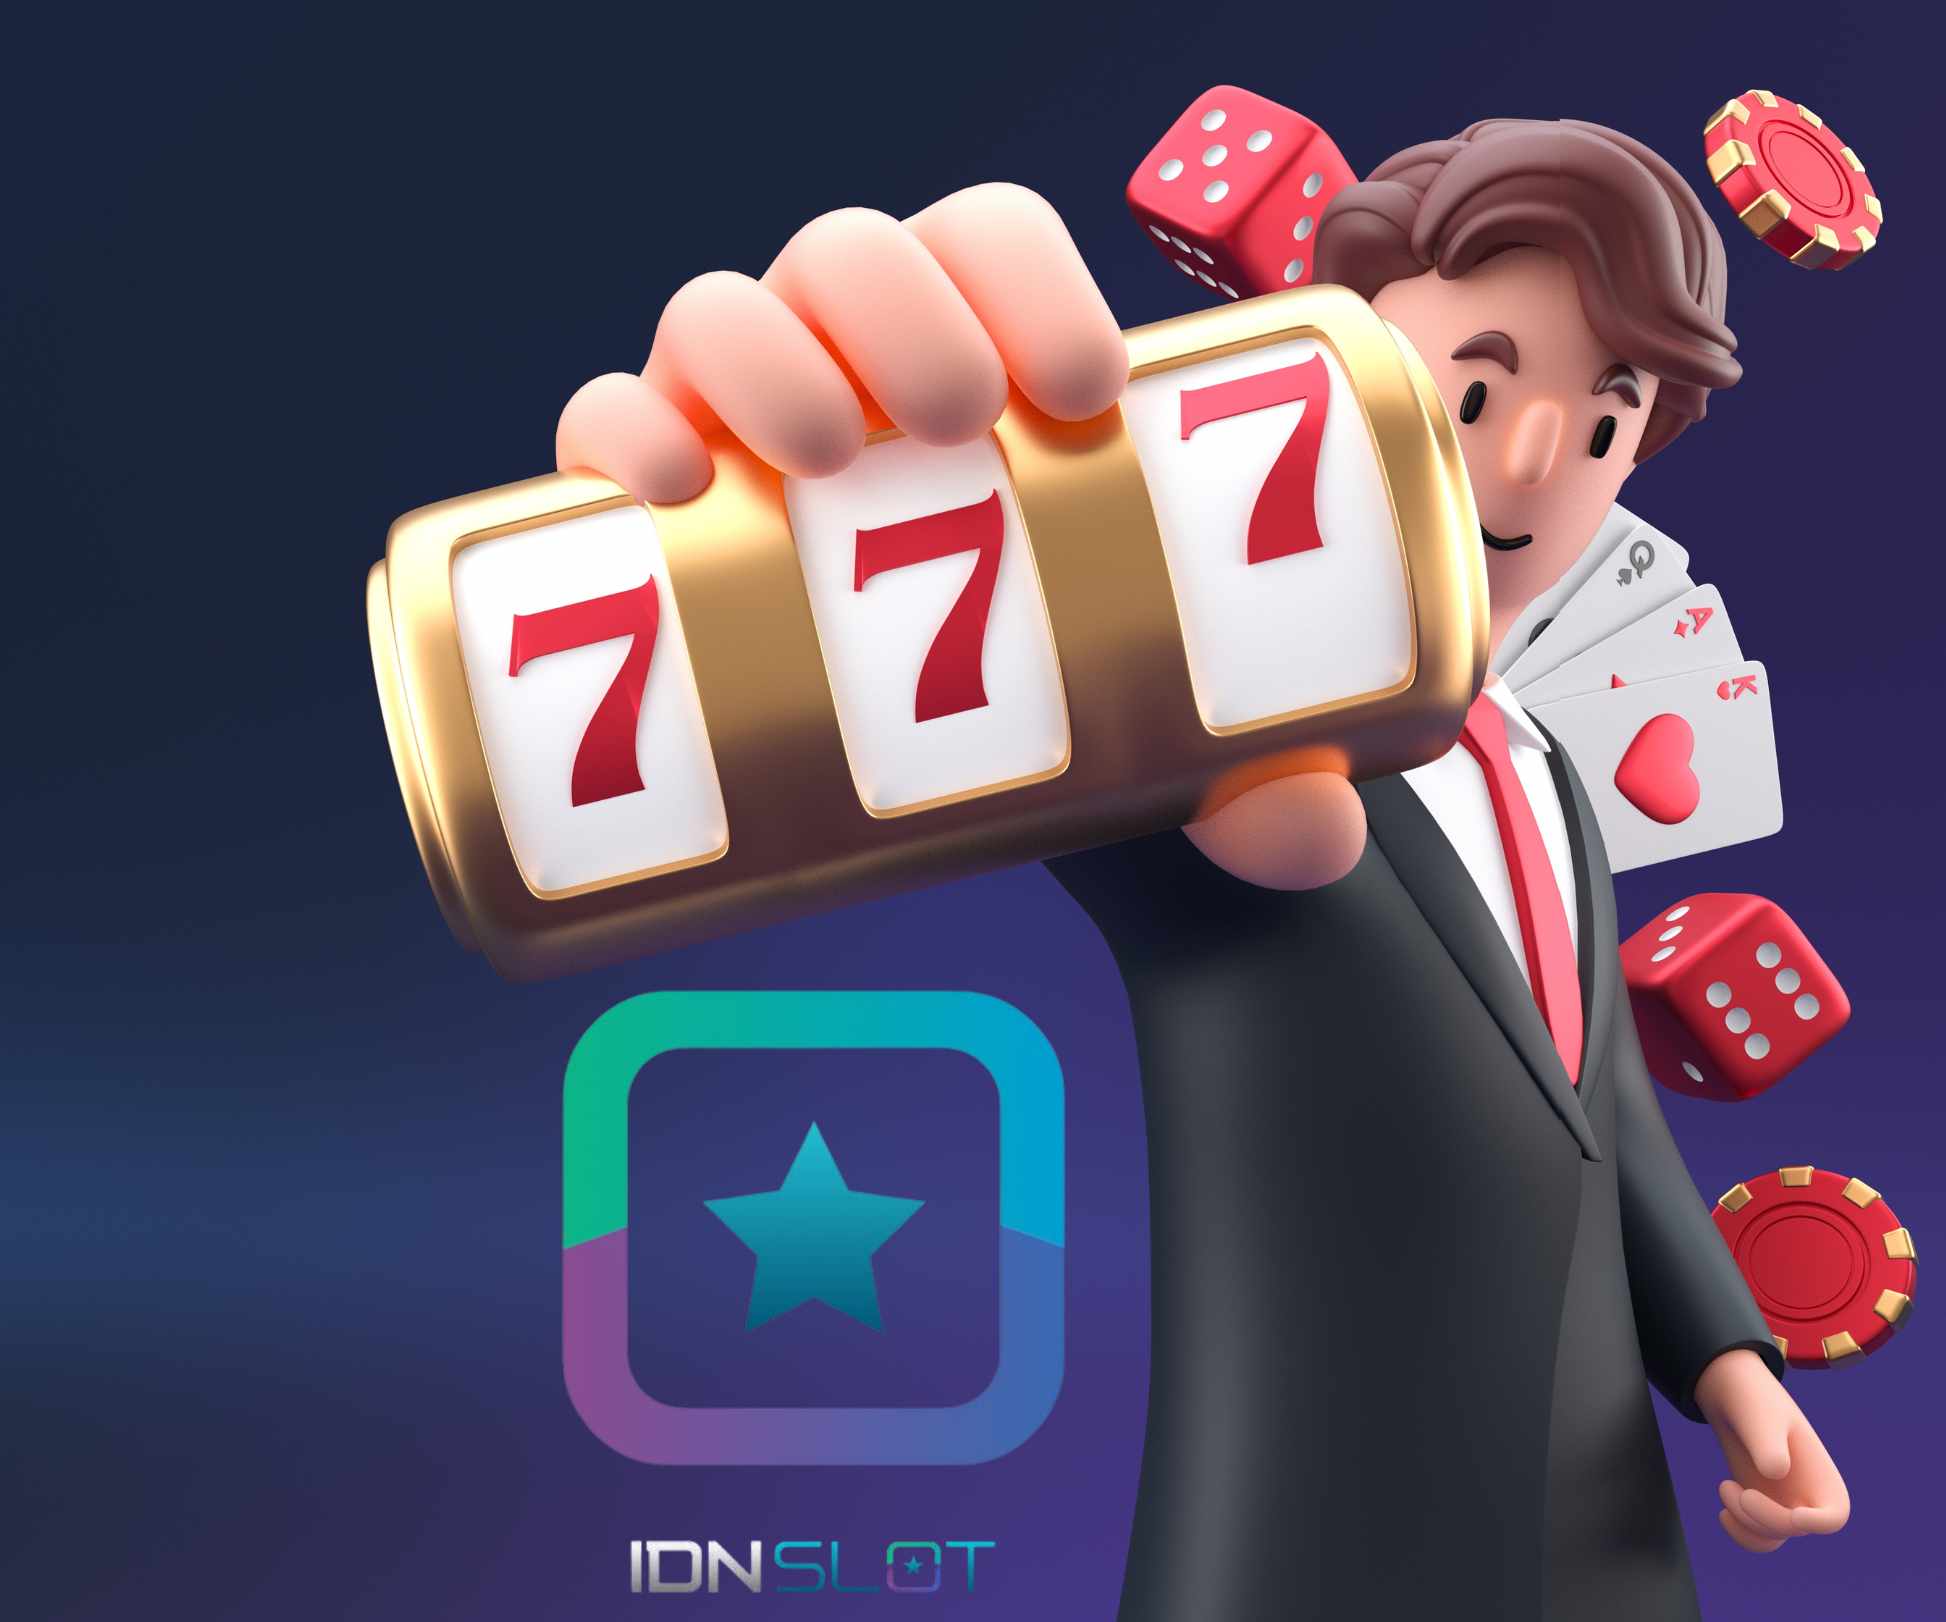 Idn slot 88 is the king of future slots